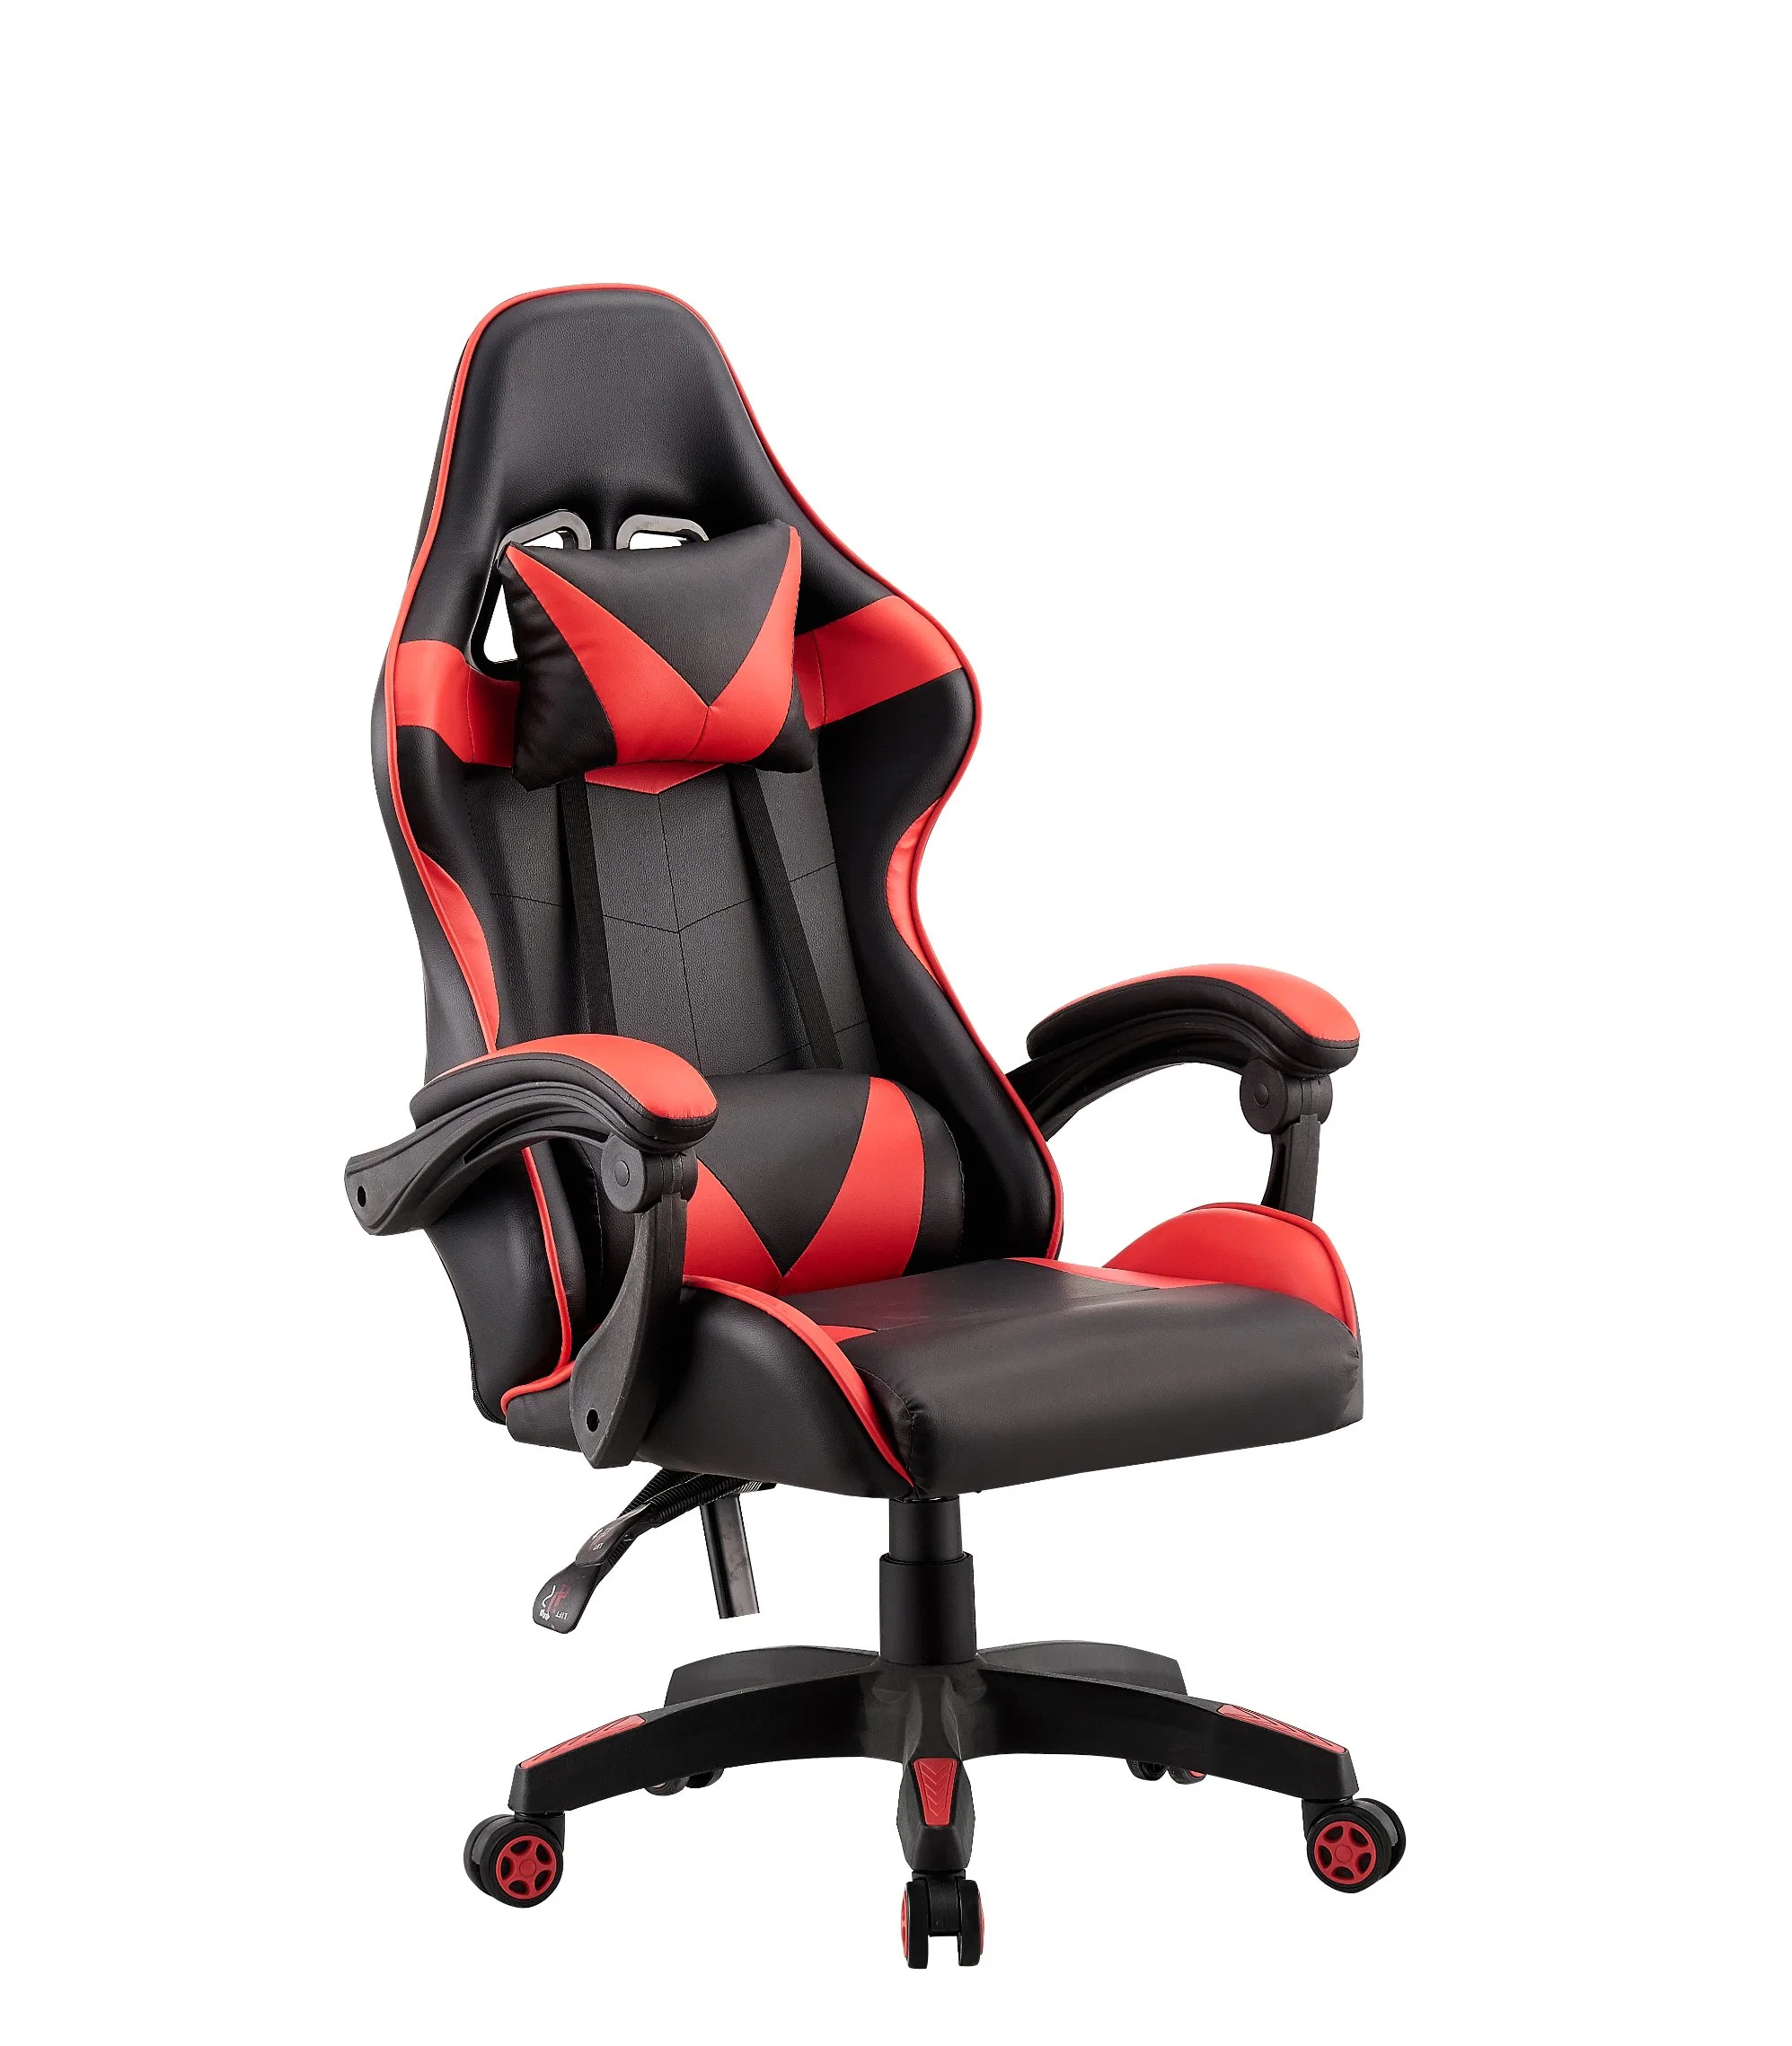 China Wholesale/Supplier Market Best Cadeira/Silla/Computer Racing/Gamer/Game/Gaming Chairs Price for Lift/Recliner/Swivel/Office/High Back/Ergonomic